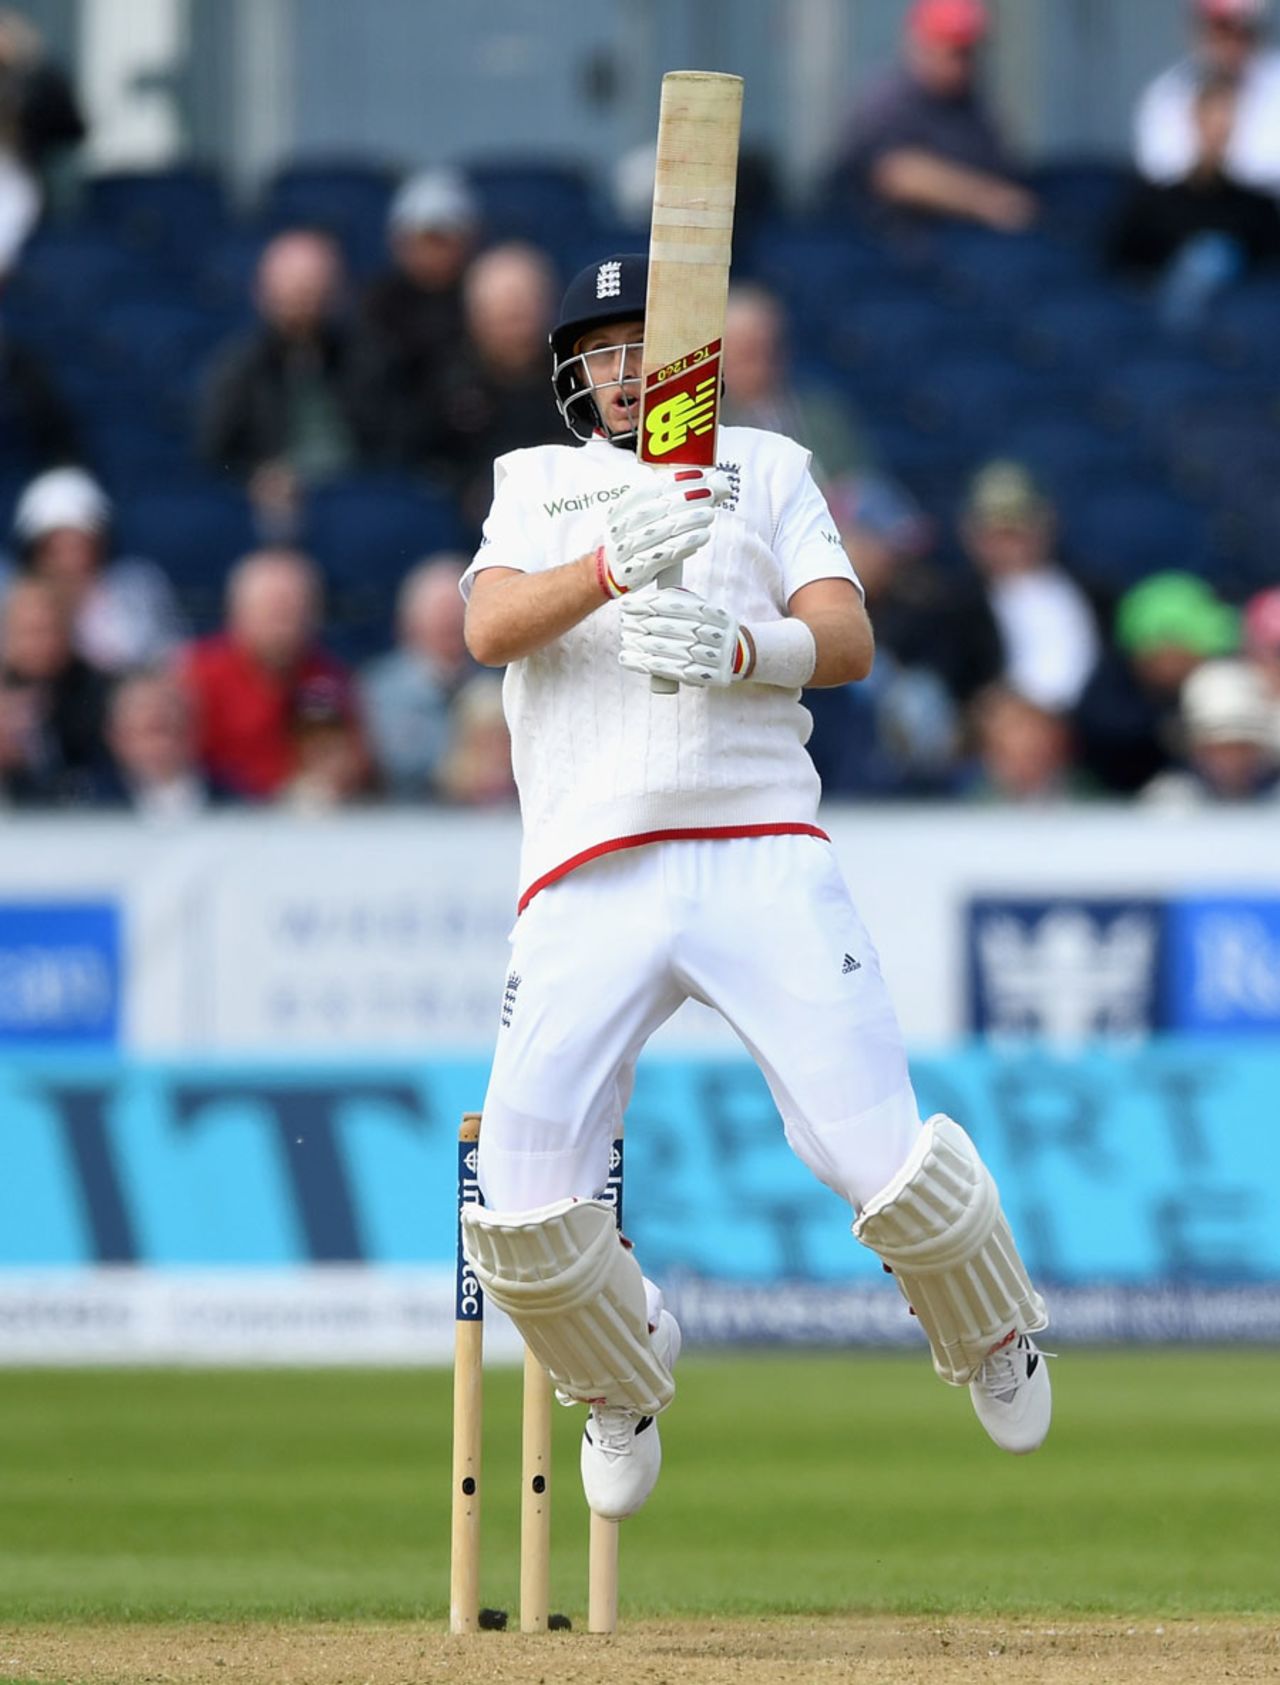 Joe Root was surprised by some extra bounce, England v Sri Lanka, 2nd Test, Chester-le-Street, 1st day, May 27, 2016